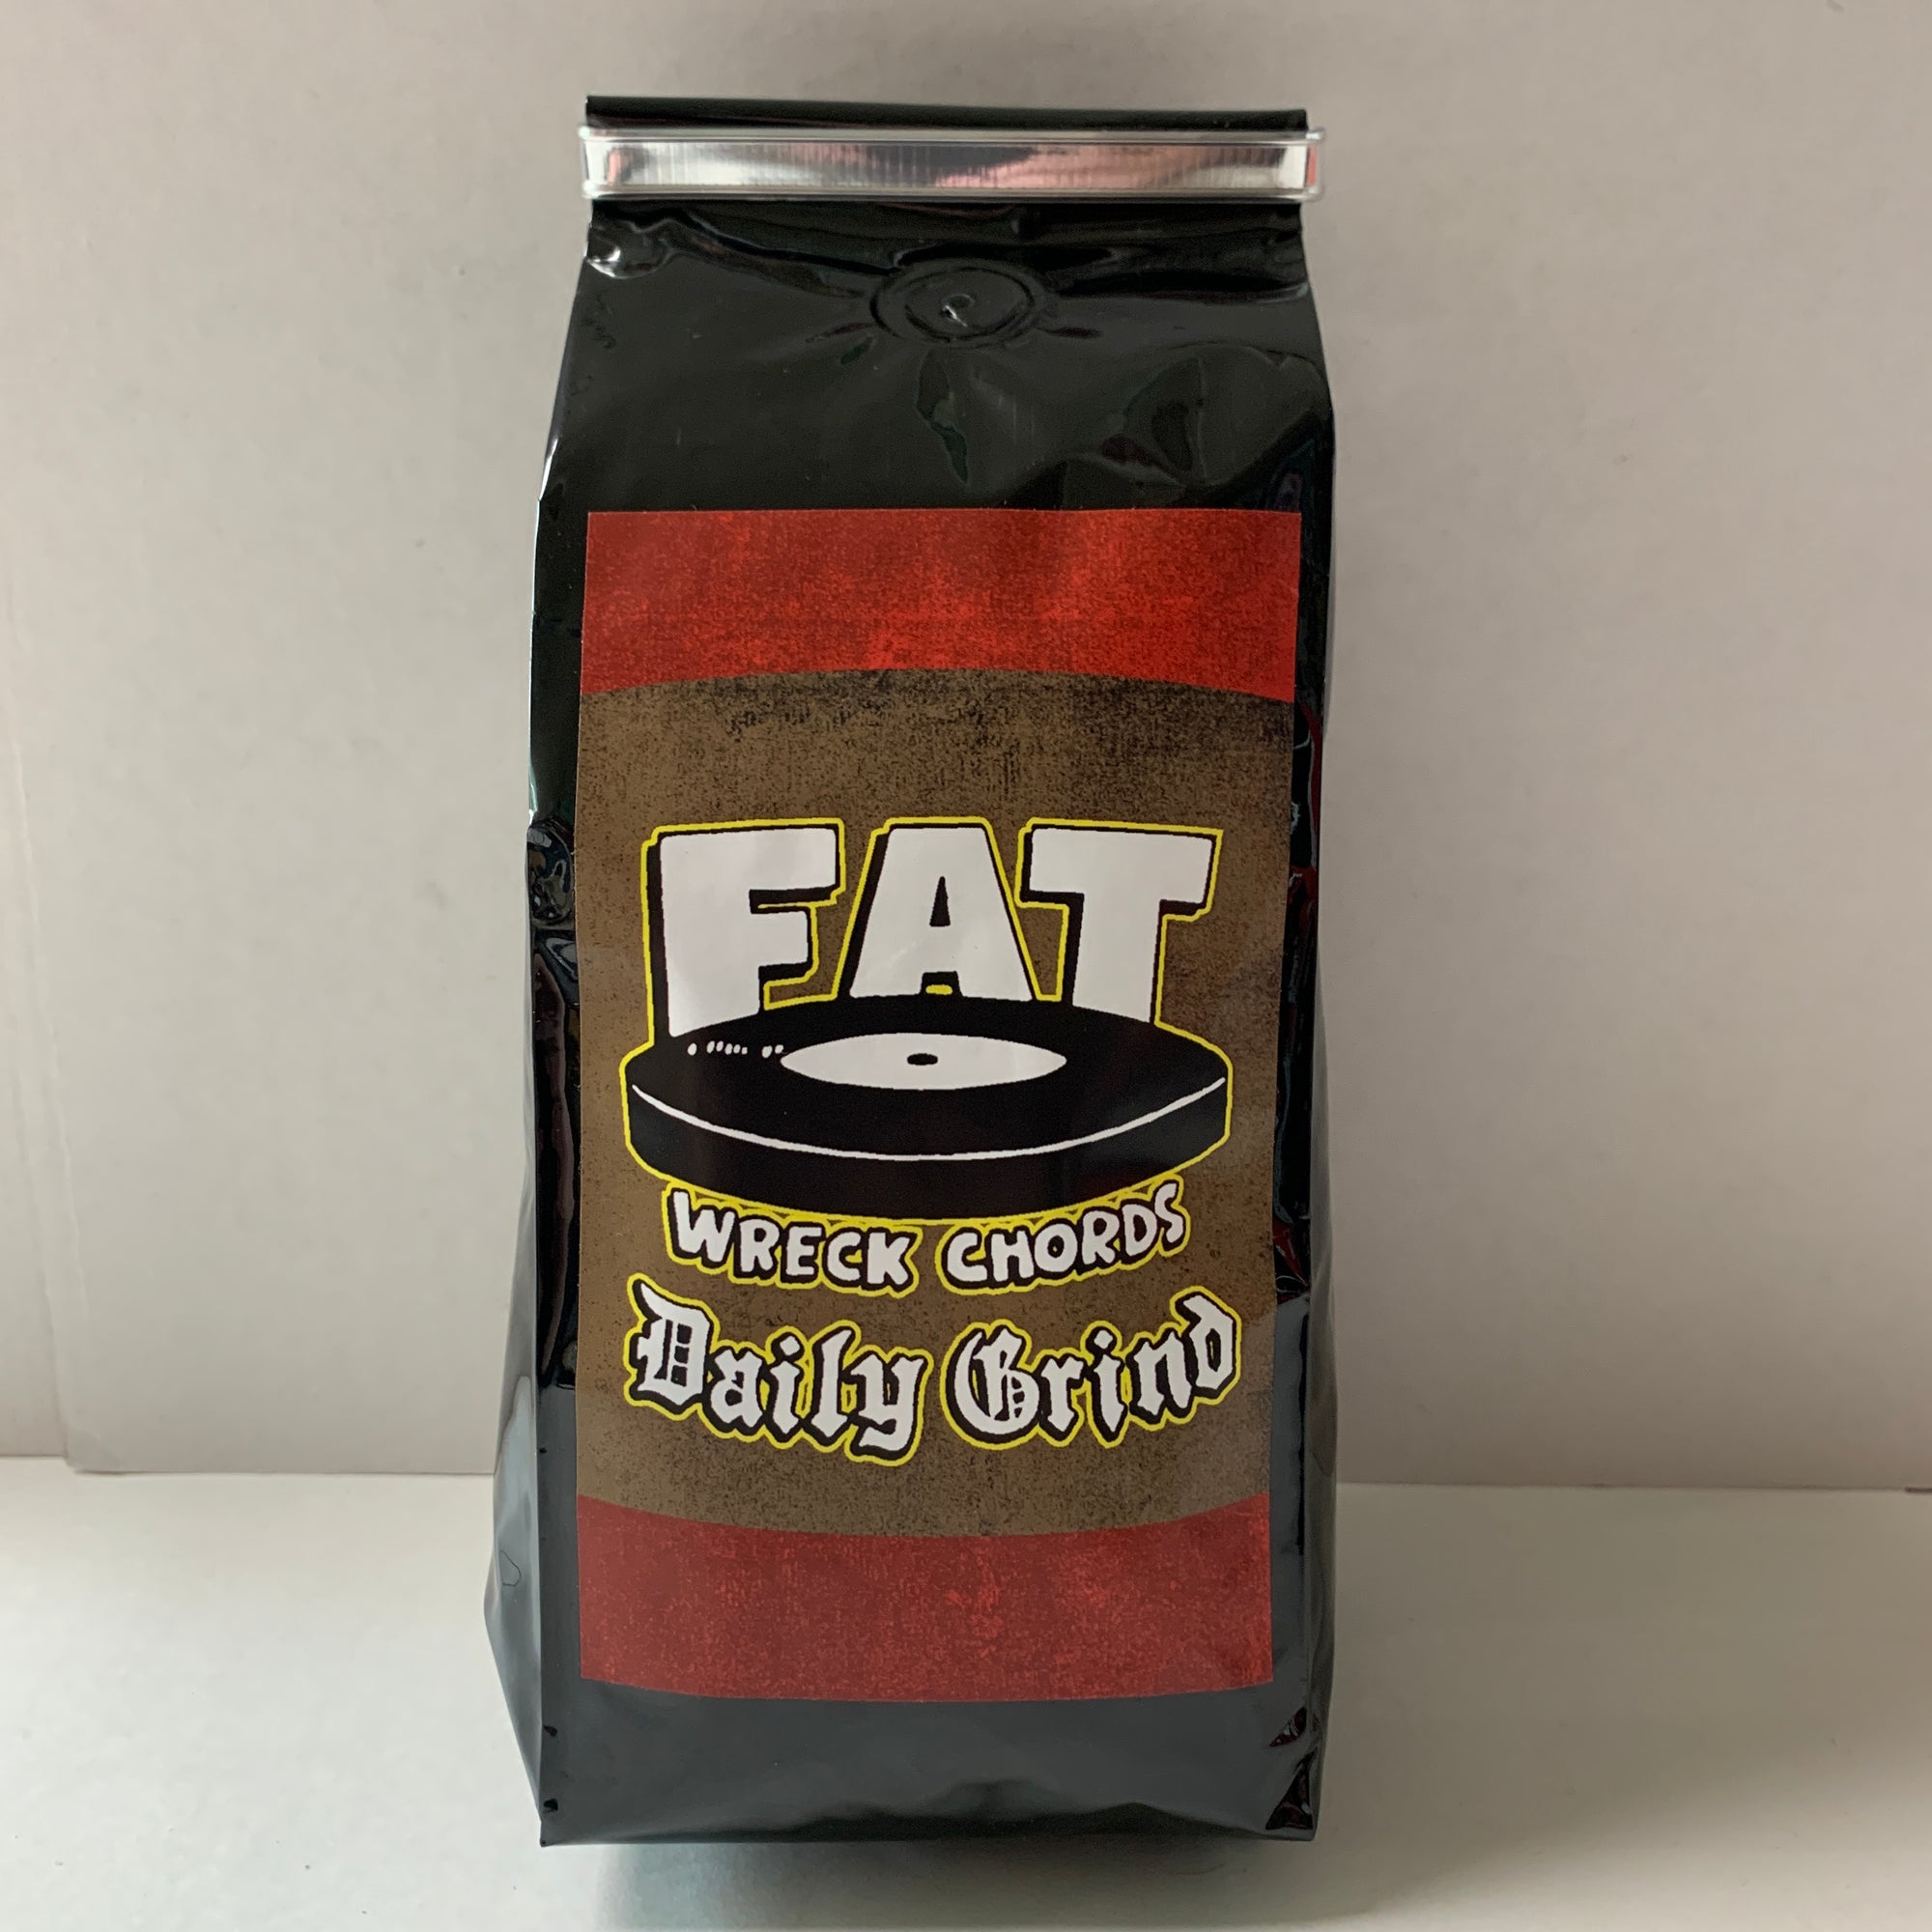 Fat Wreck Chords 'Daily Grind' Coffee